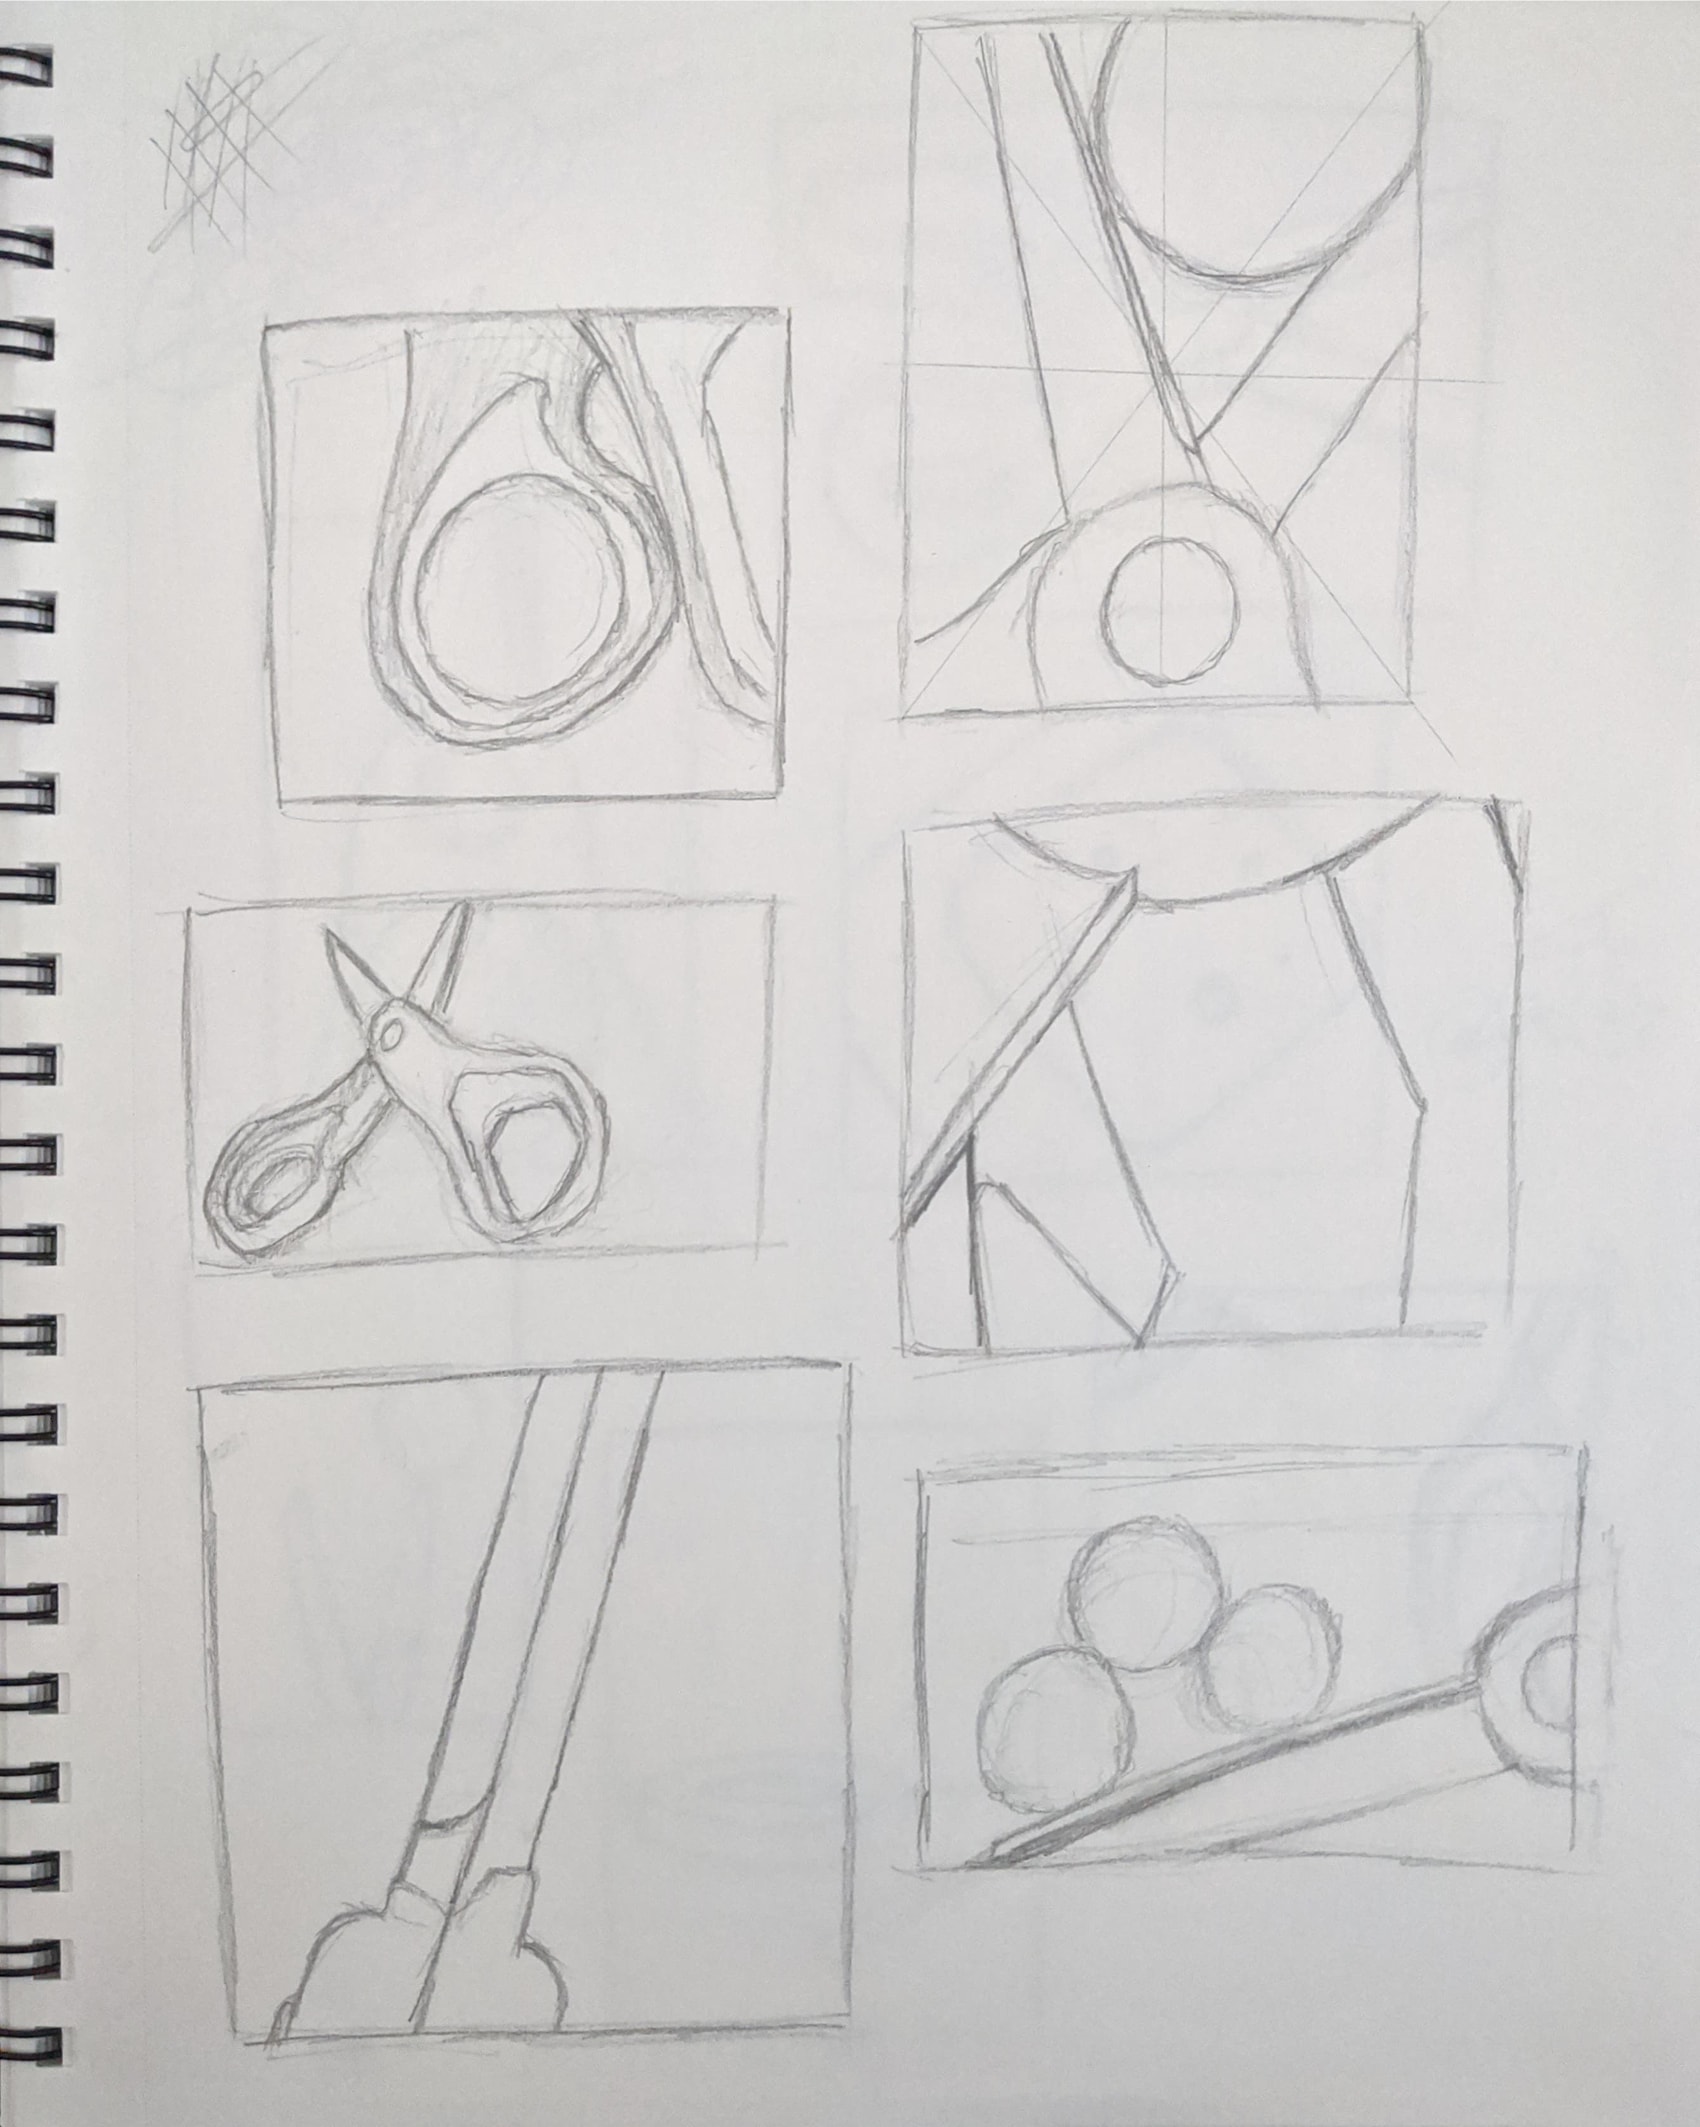 Thumbnail Sketches & Grid Transpositions